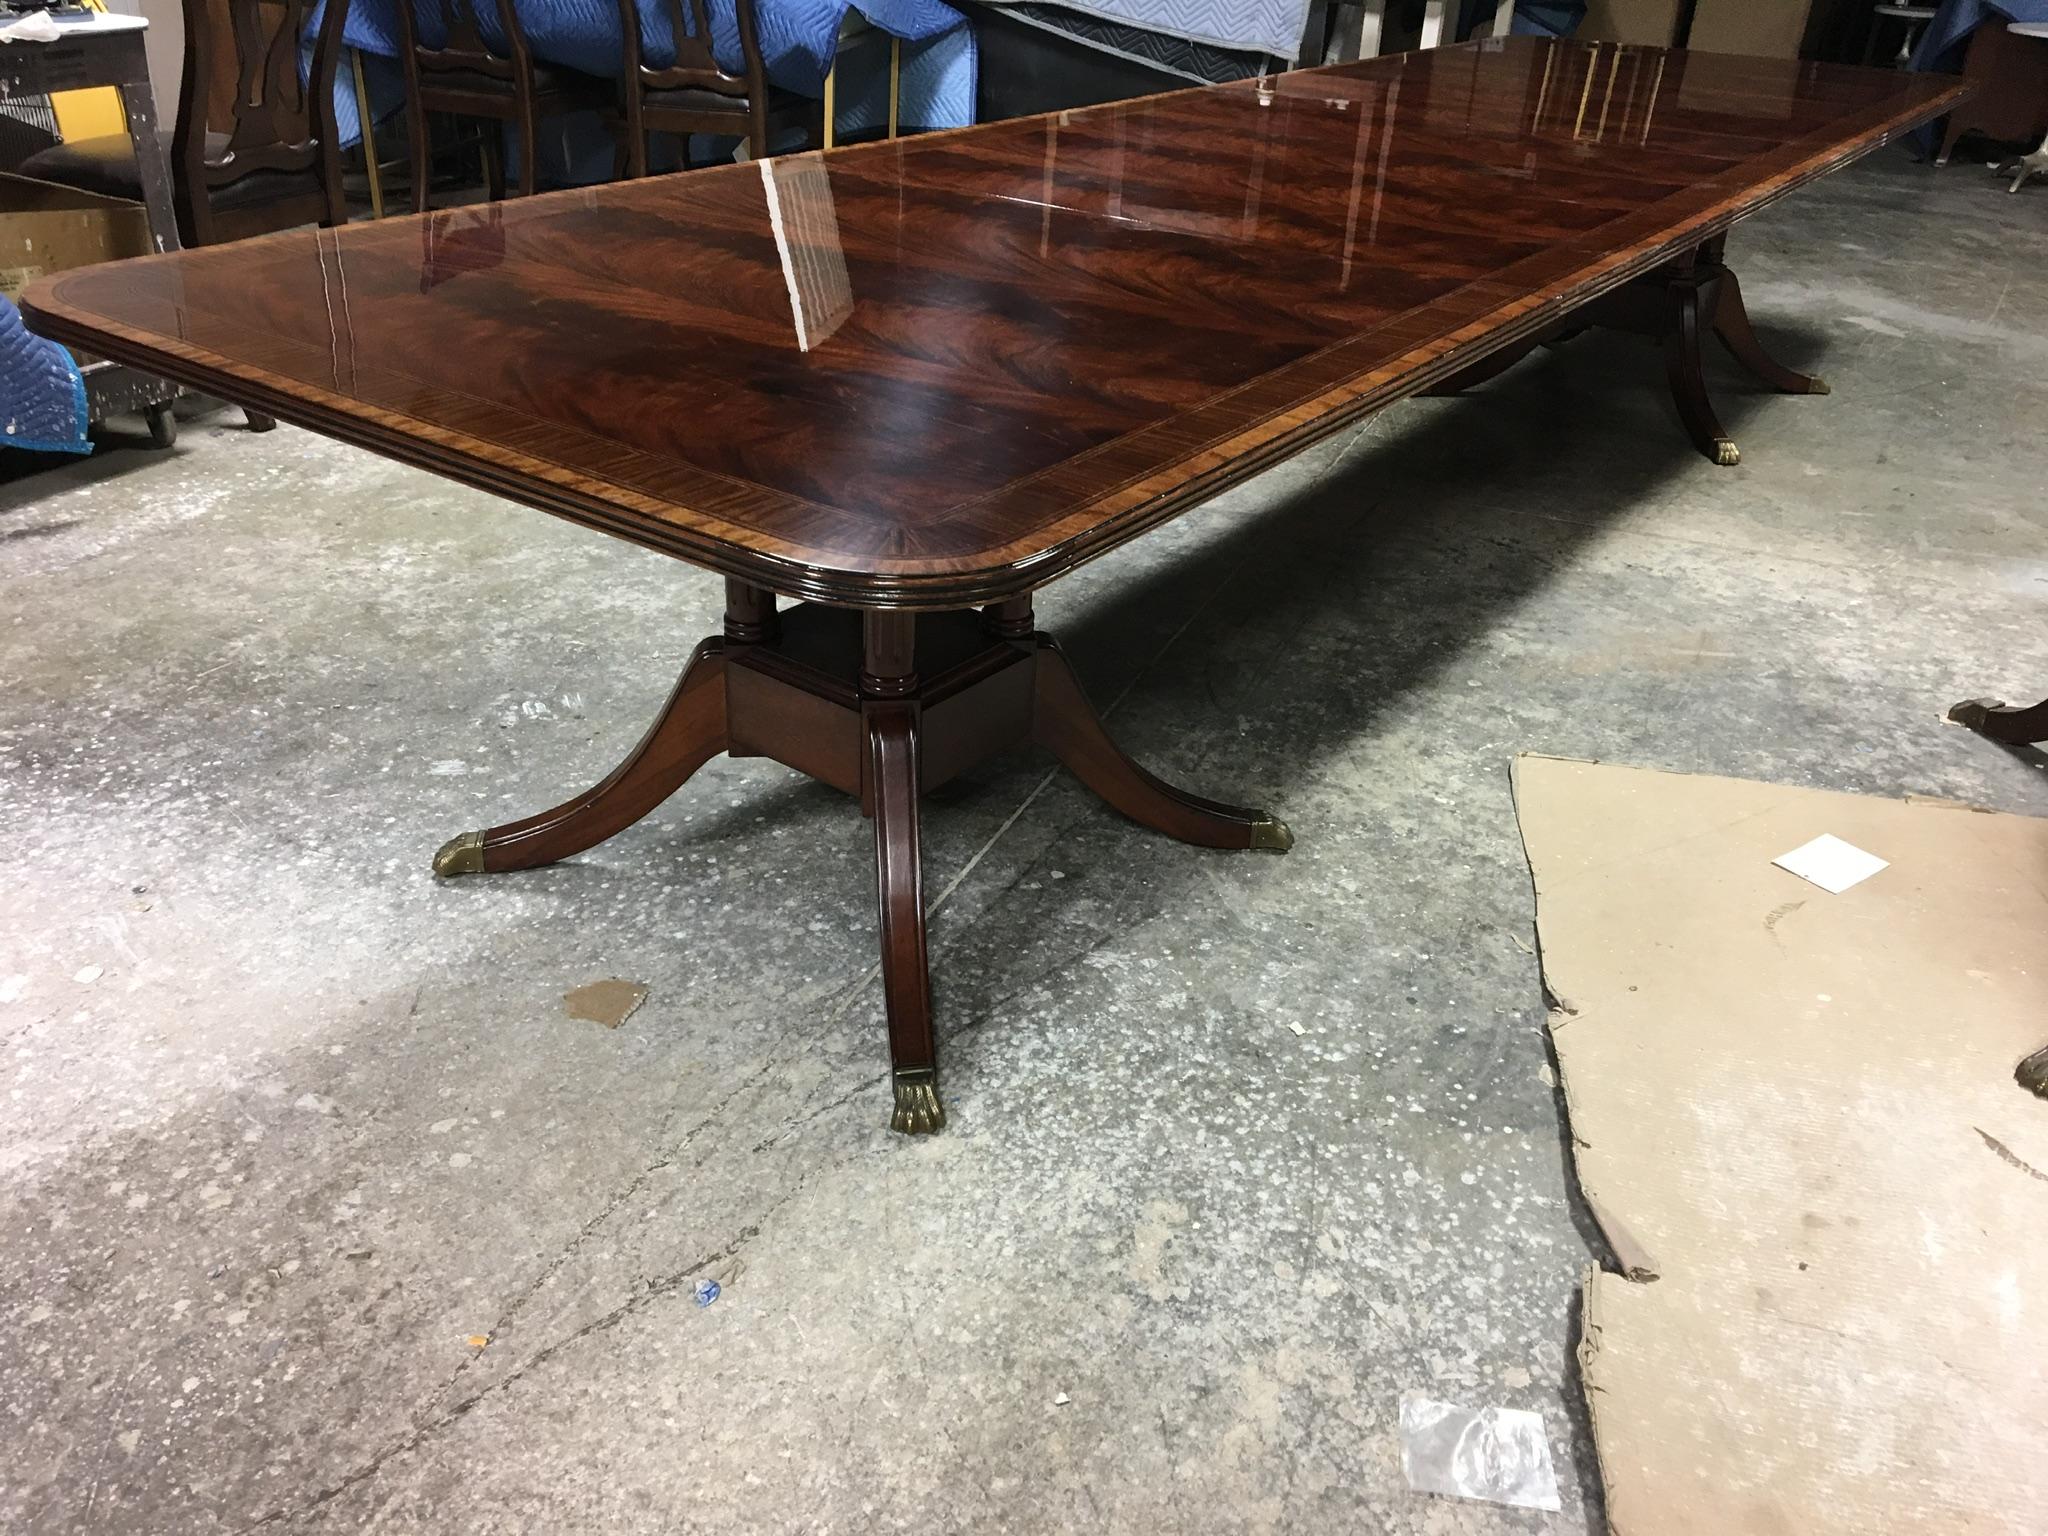 This is a made-to-order Large Traditional mahogany banquet/dining table made in the Leighton Hall shop. It features a field of slip-matched swirly crotch mahogany from west Africa and Satinwood and Pau Ferro borders from South America. It has a hand